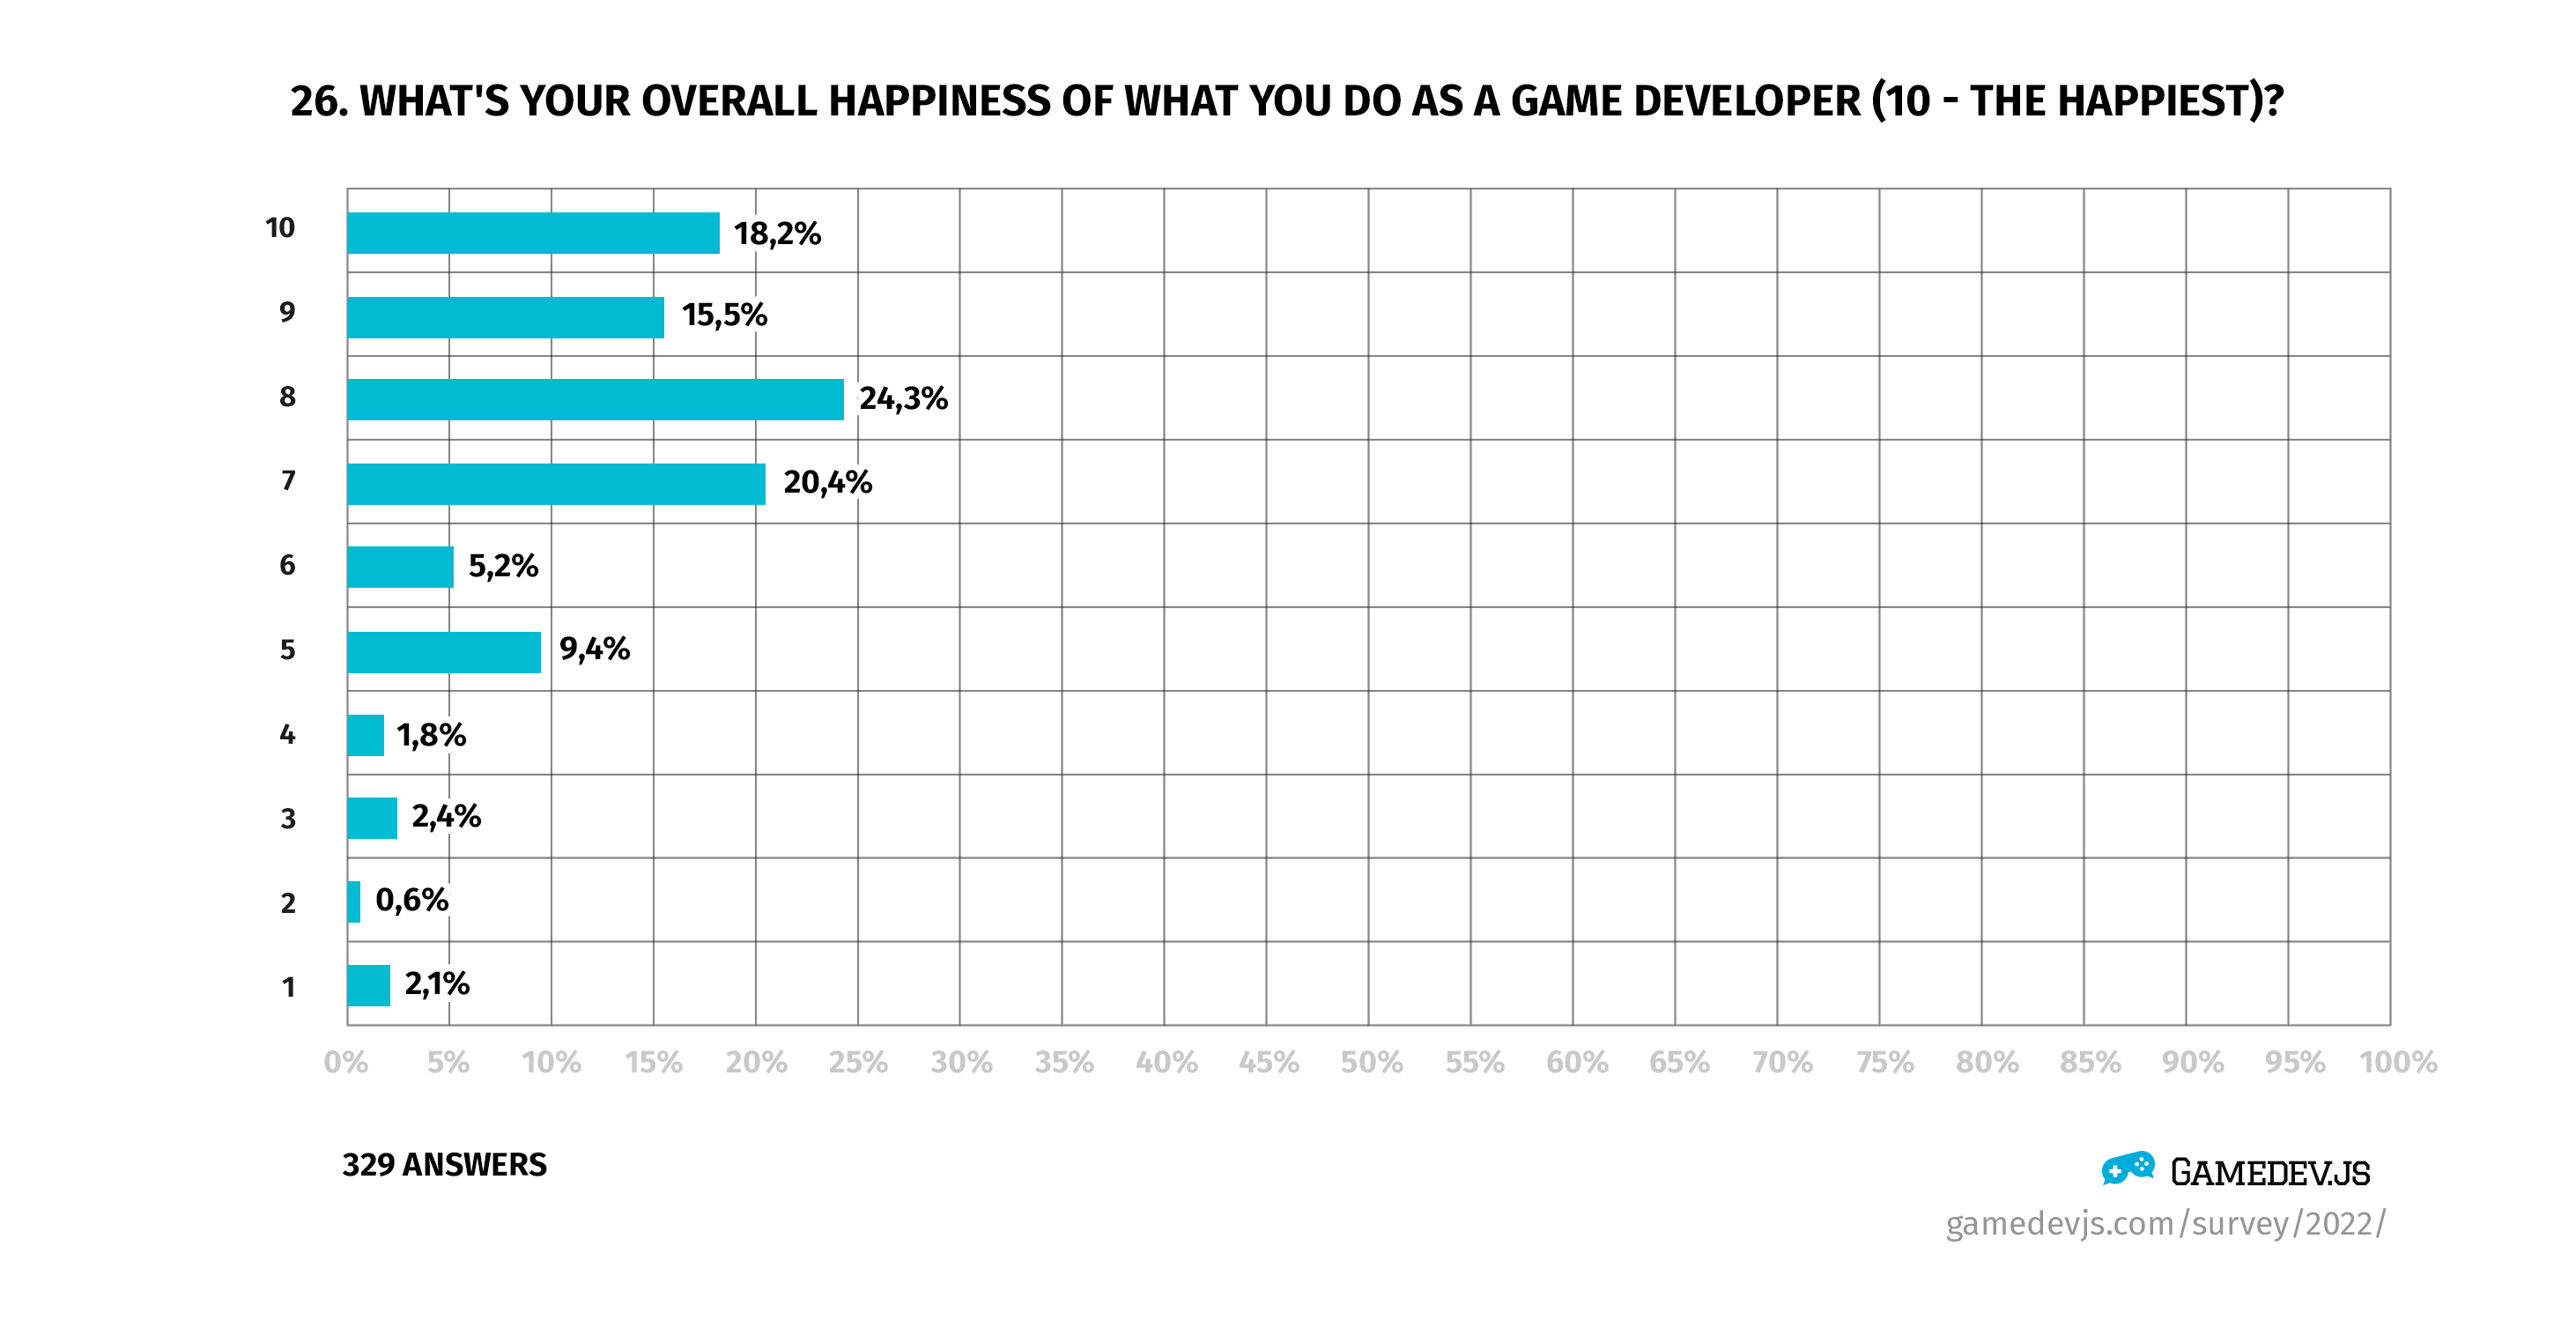 Gamedev.js Survey 2022 - Question #24: What's your overall happiness of what you do as a game developer (10 - the happiest)?